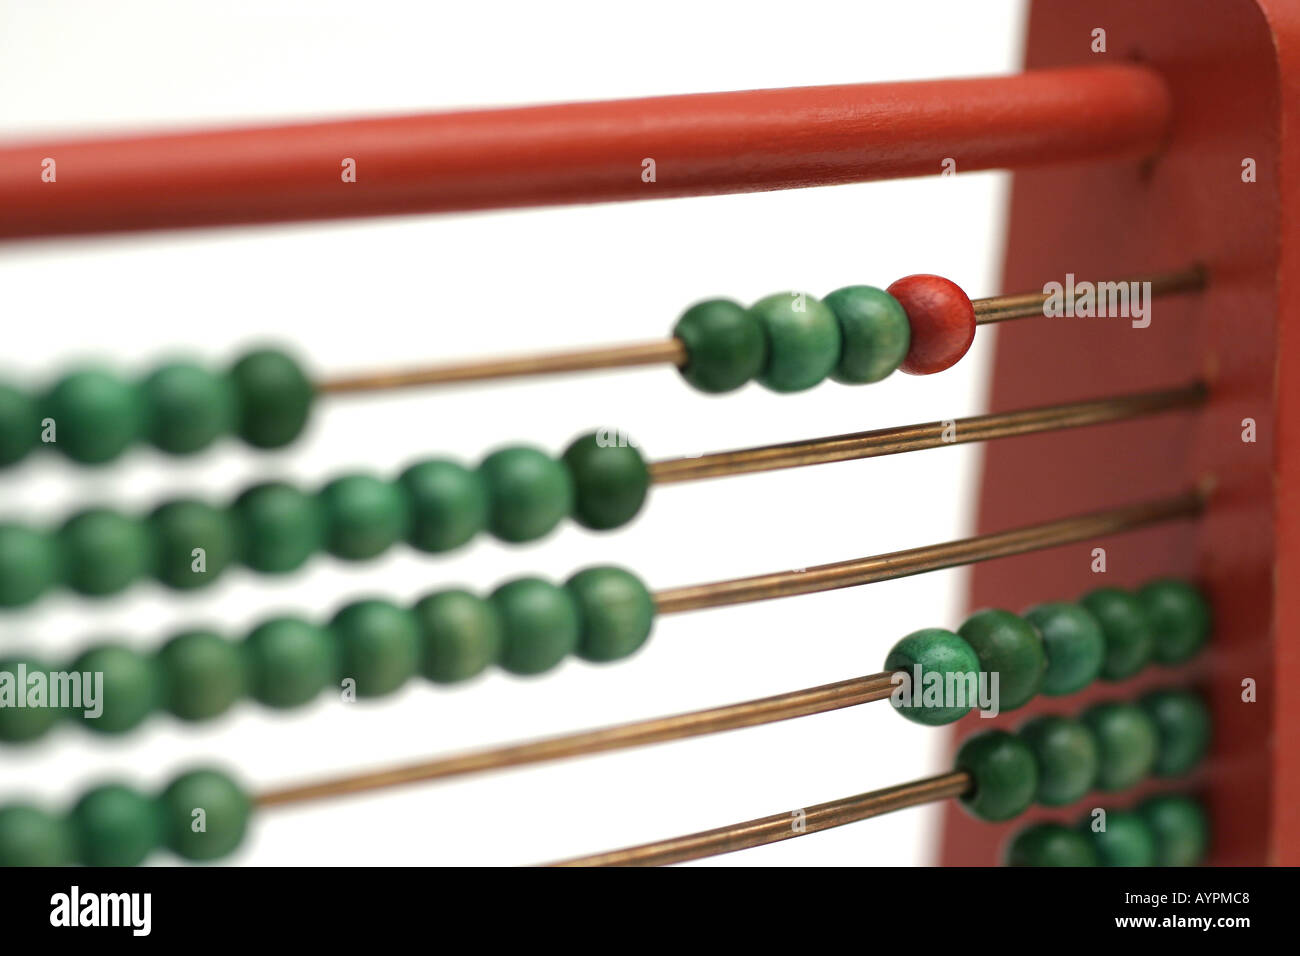 Counter balls give a count by sliding on the rods of abacus Stock Photo